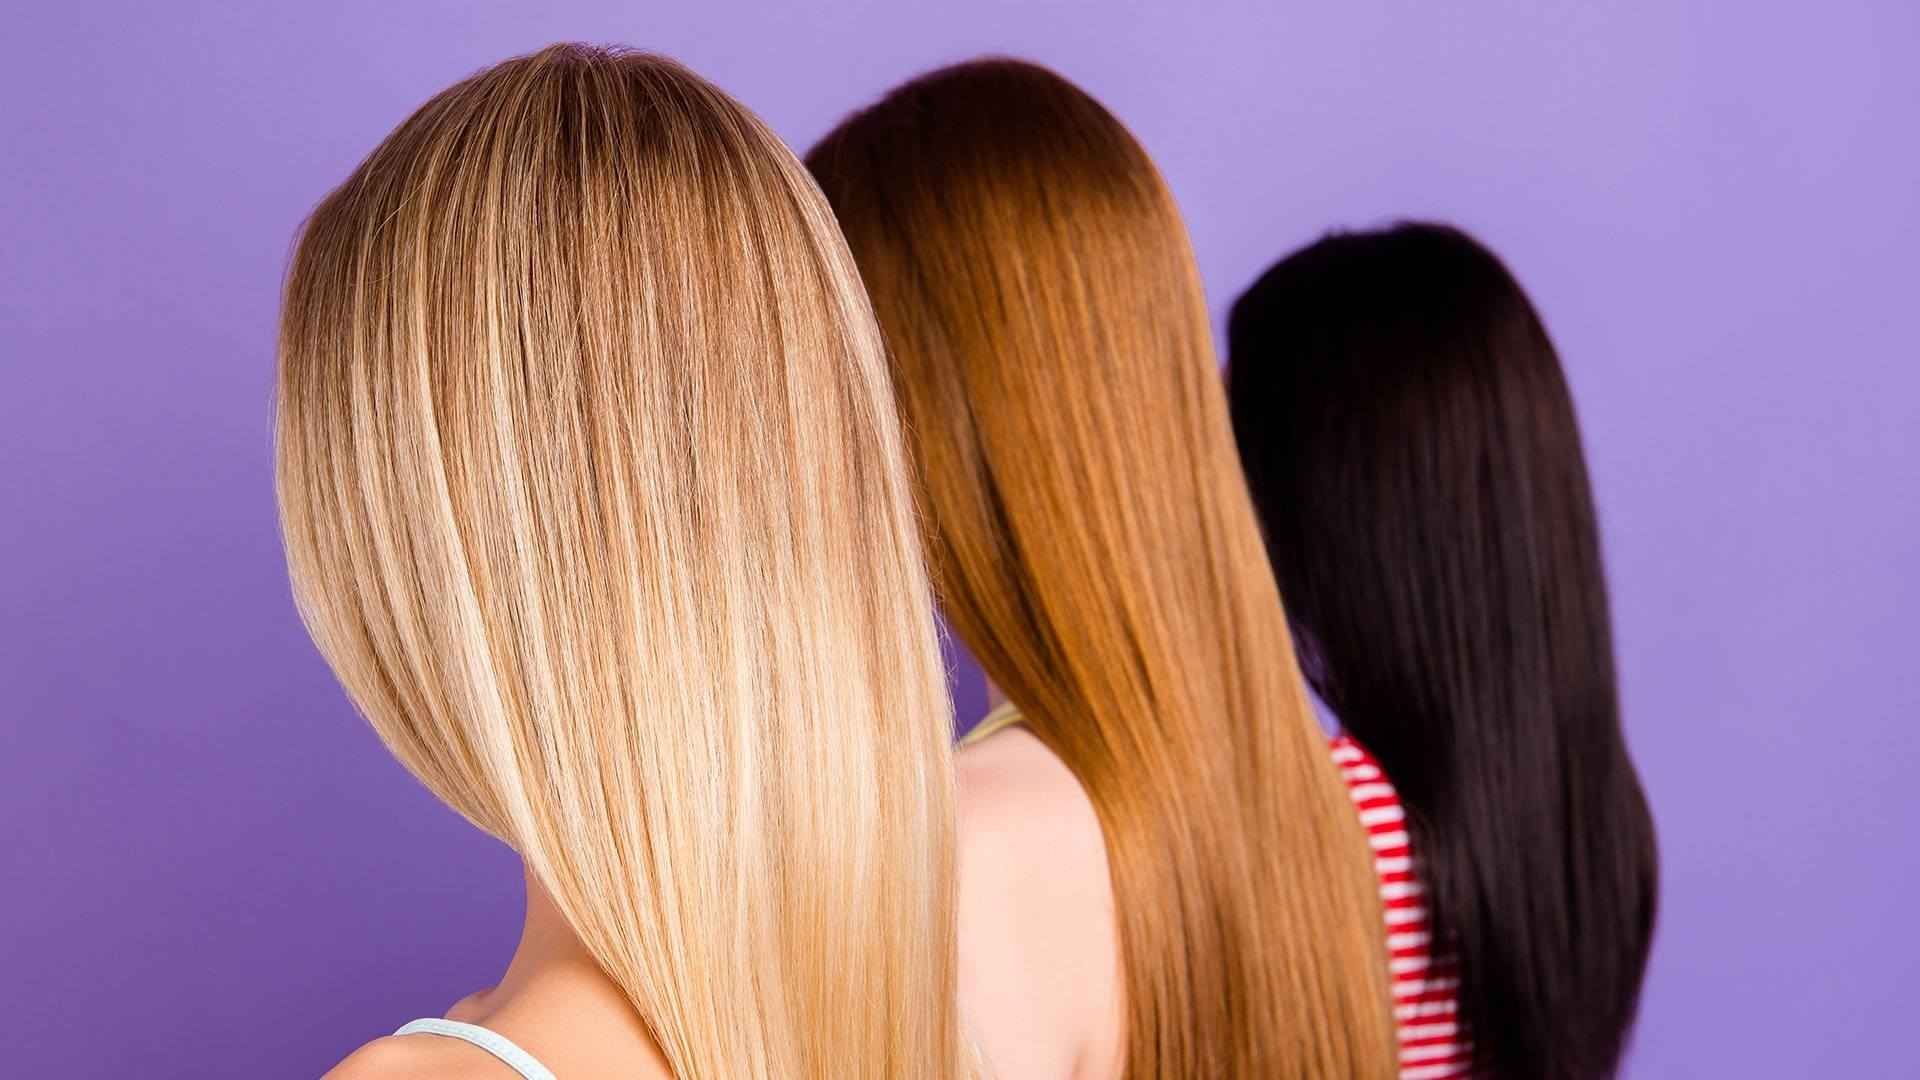 The Best Hair Color For Your Skin Tone - StyleSeat